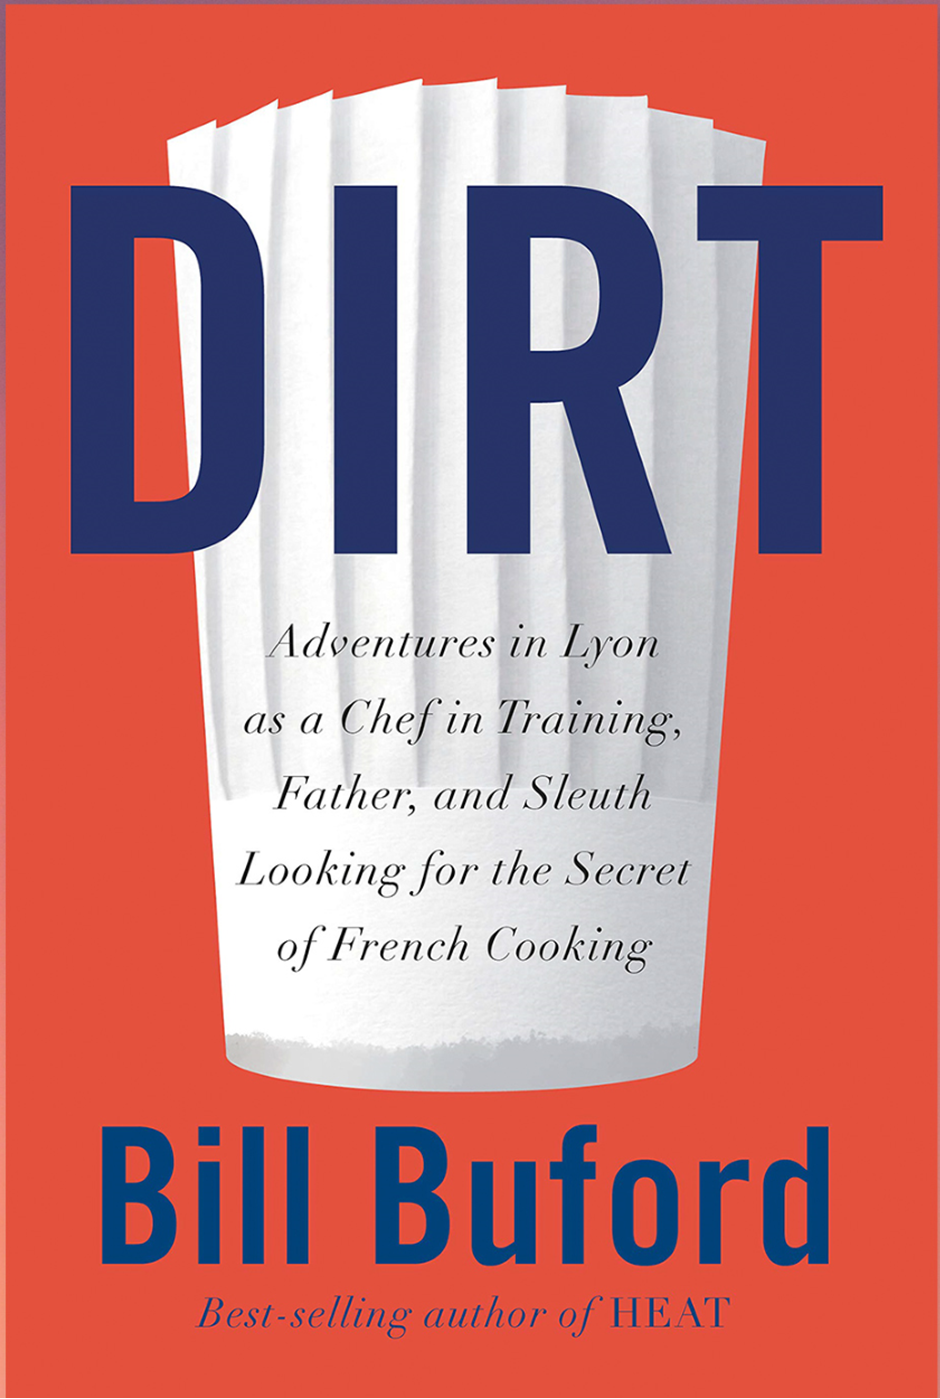 Cover of the book titled Dirt